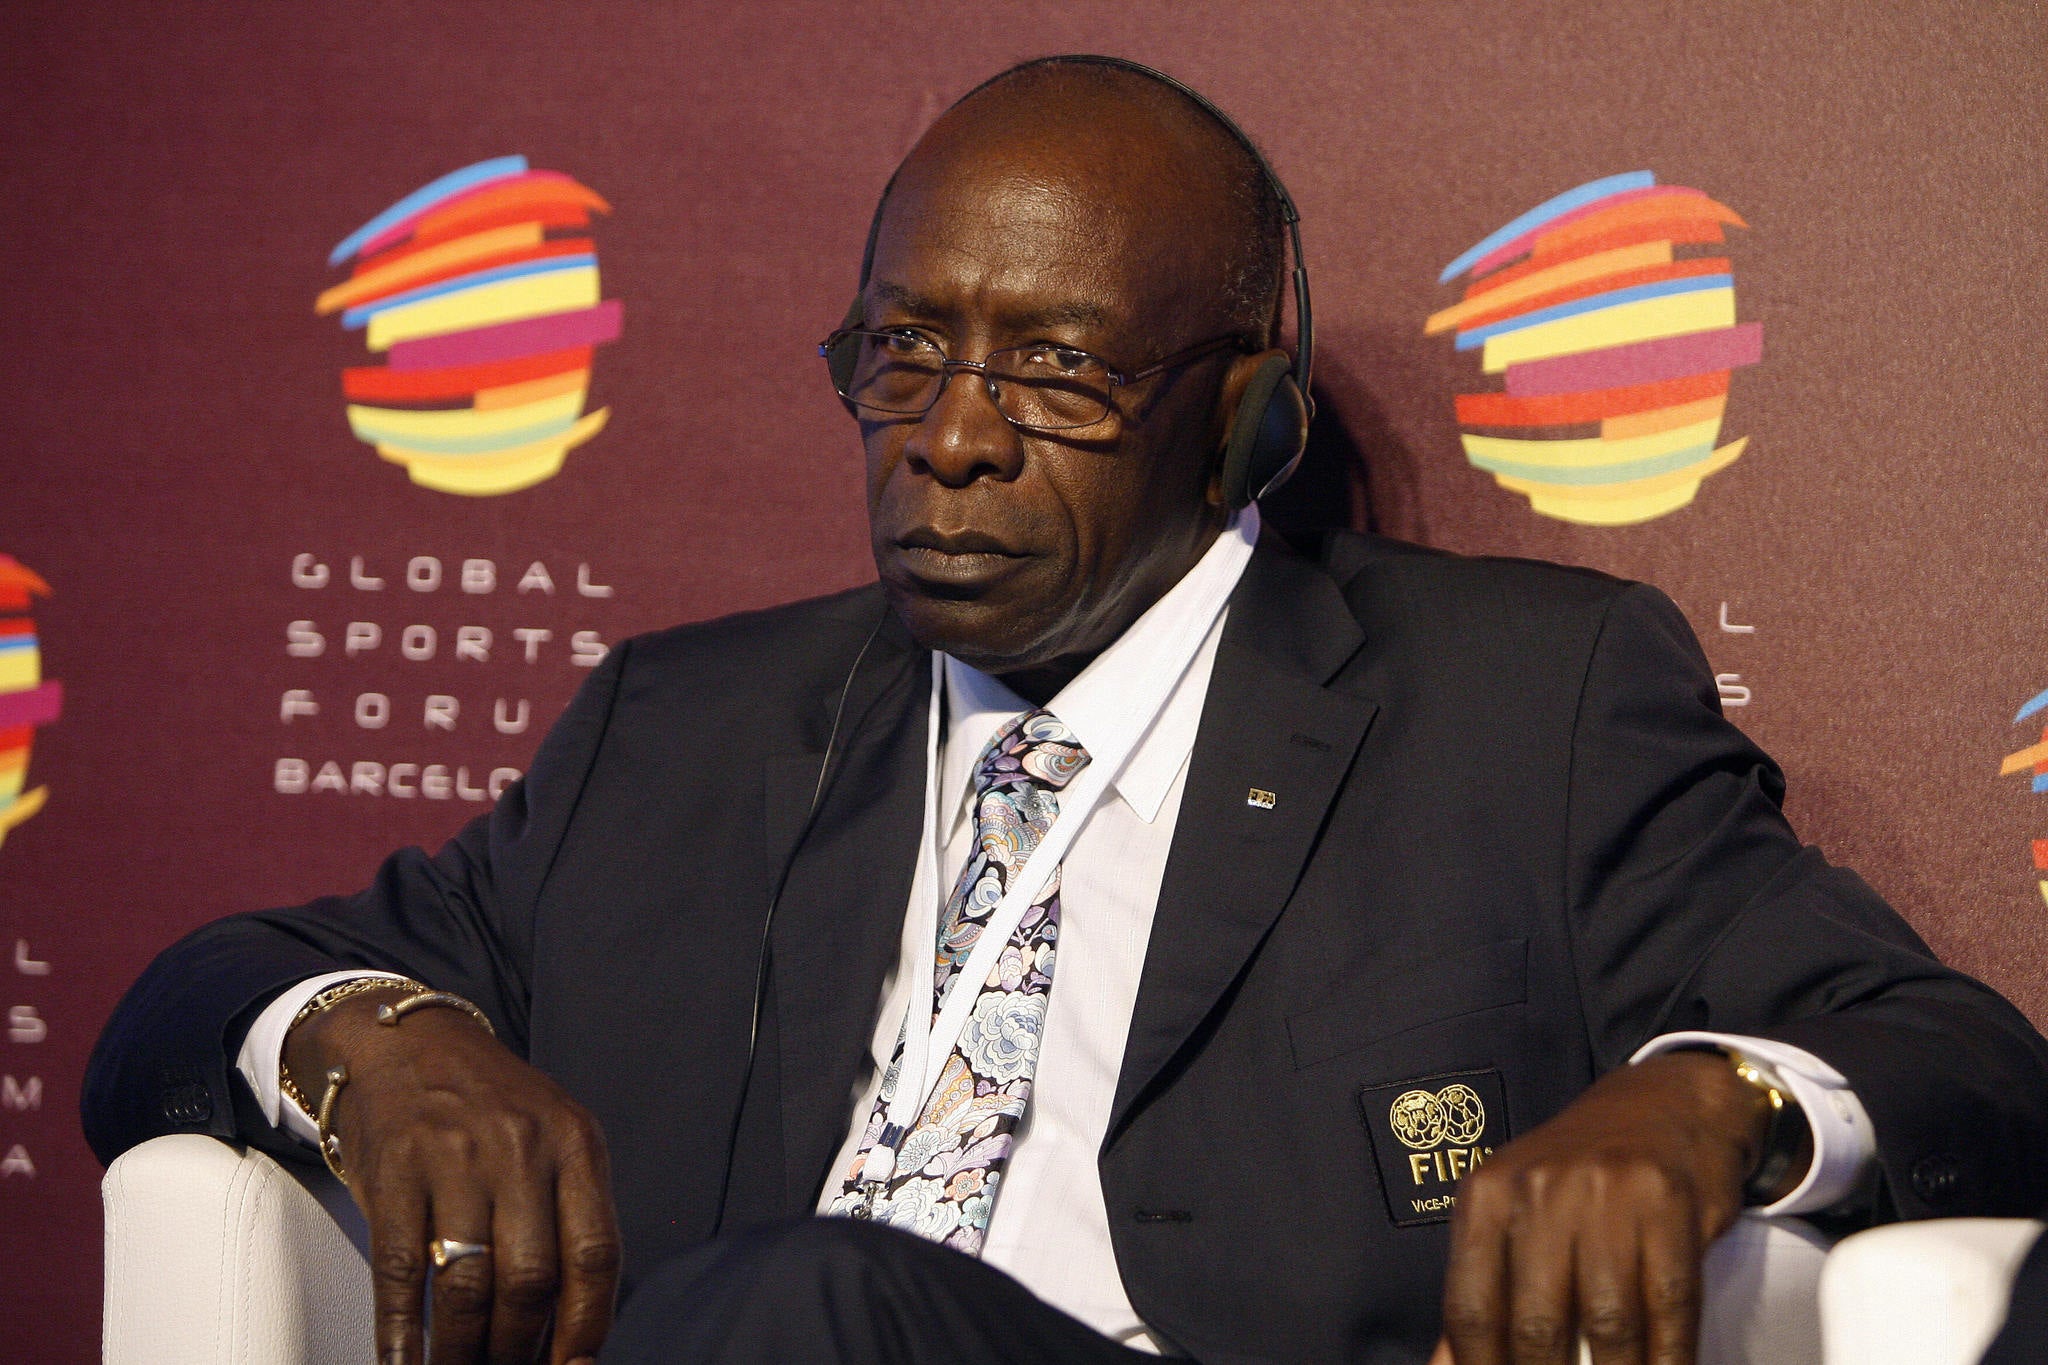 The $10 million was paid into accounts controlled by Jack Warner, Fifa Vice President and CONCACAF President